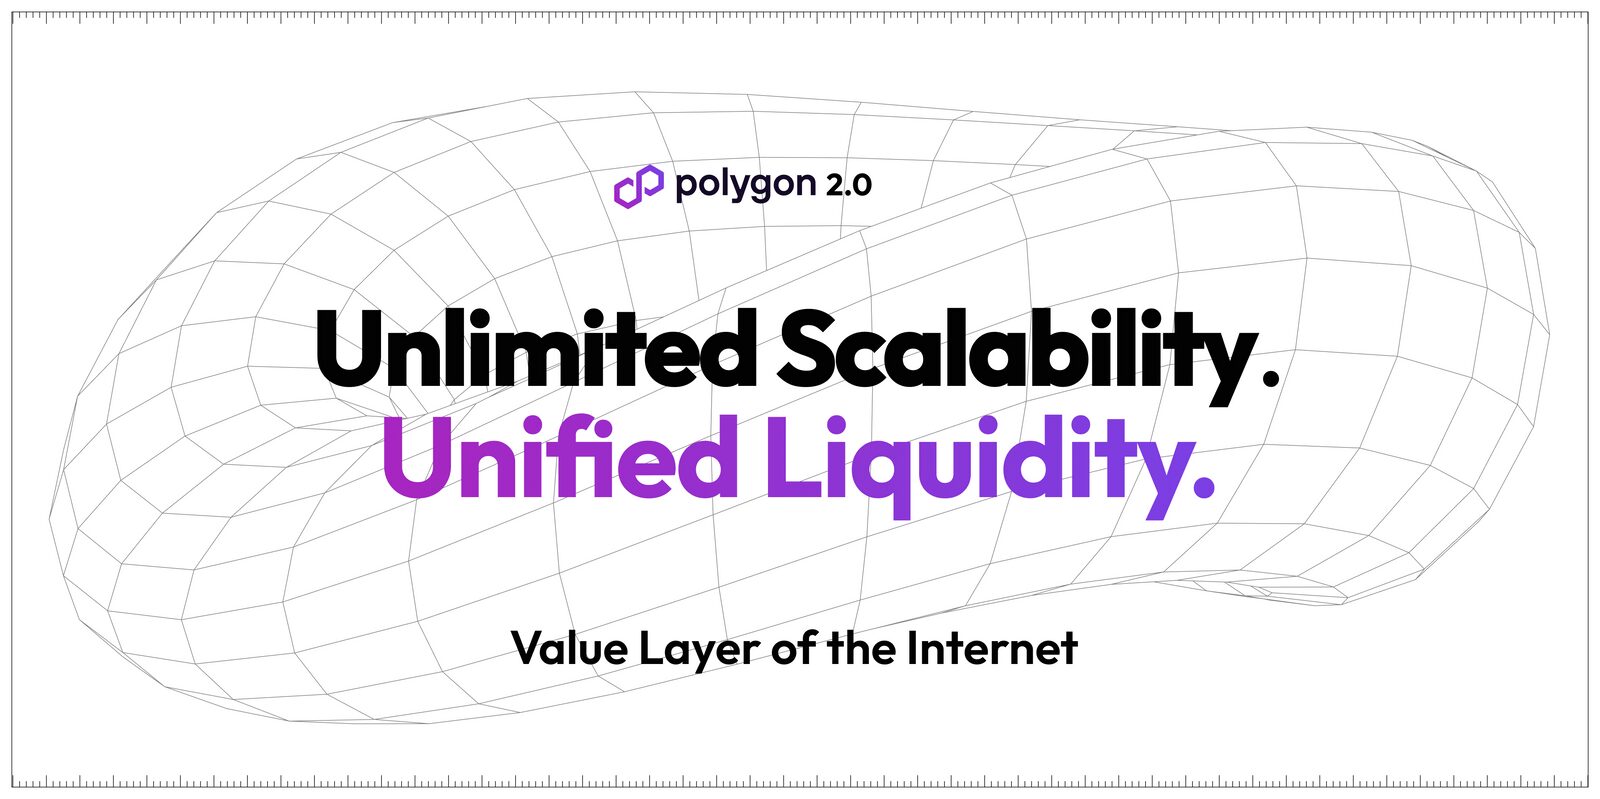 Polygon 2.0: The Evolution of the Internet’s Value Layer